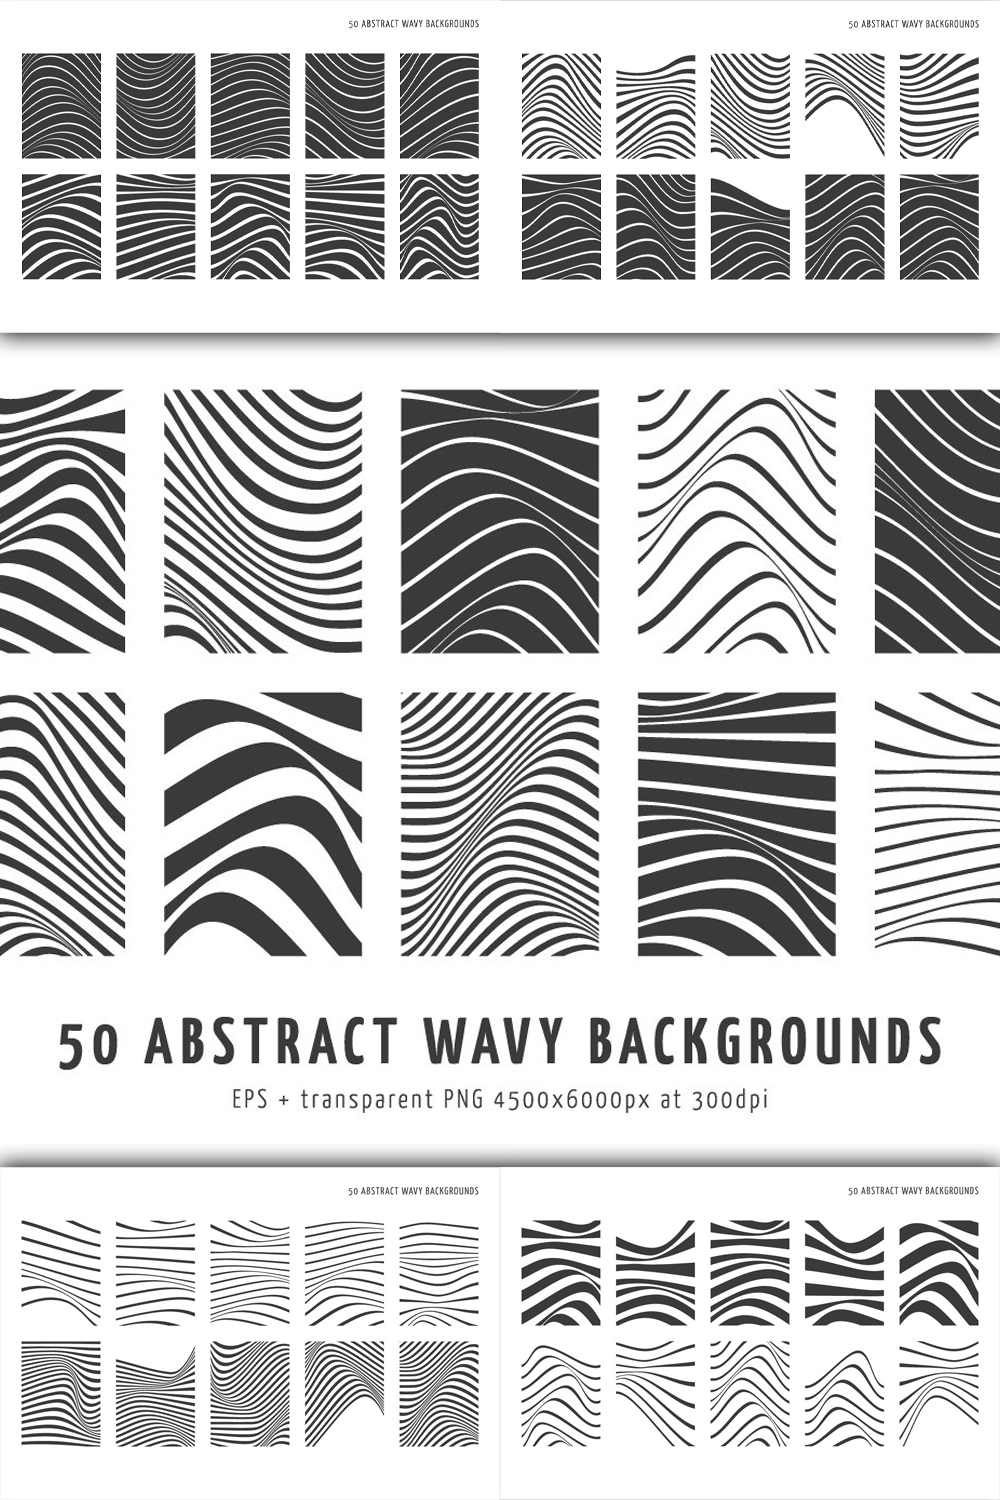 Abstract wavy vector backgrounds pinterest of pinterest.